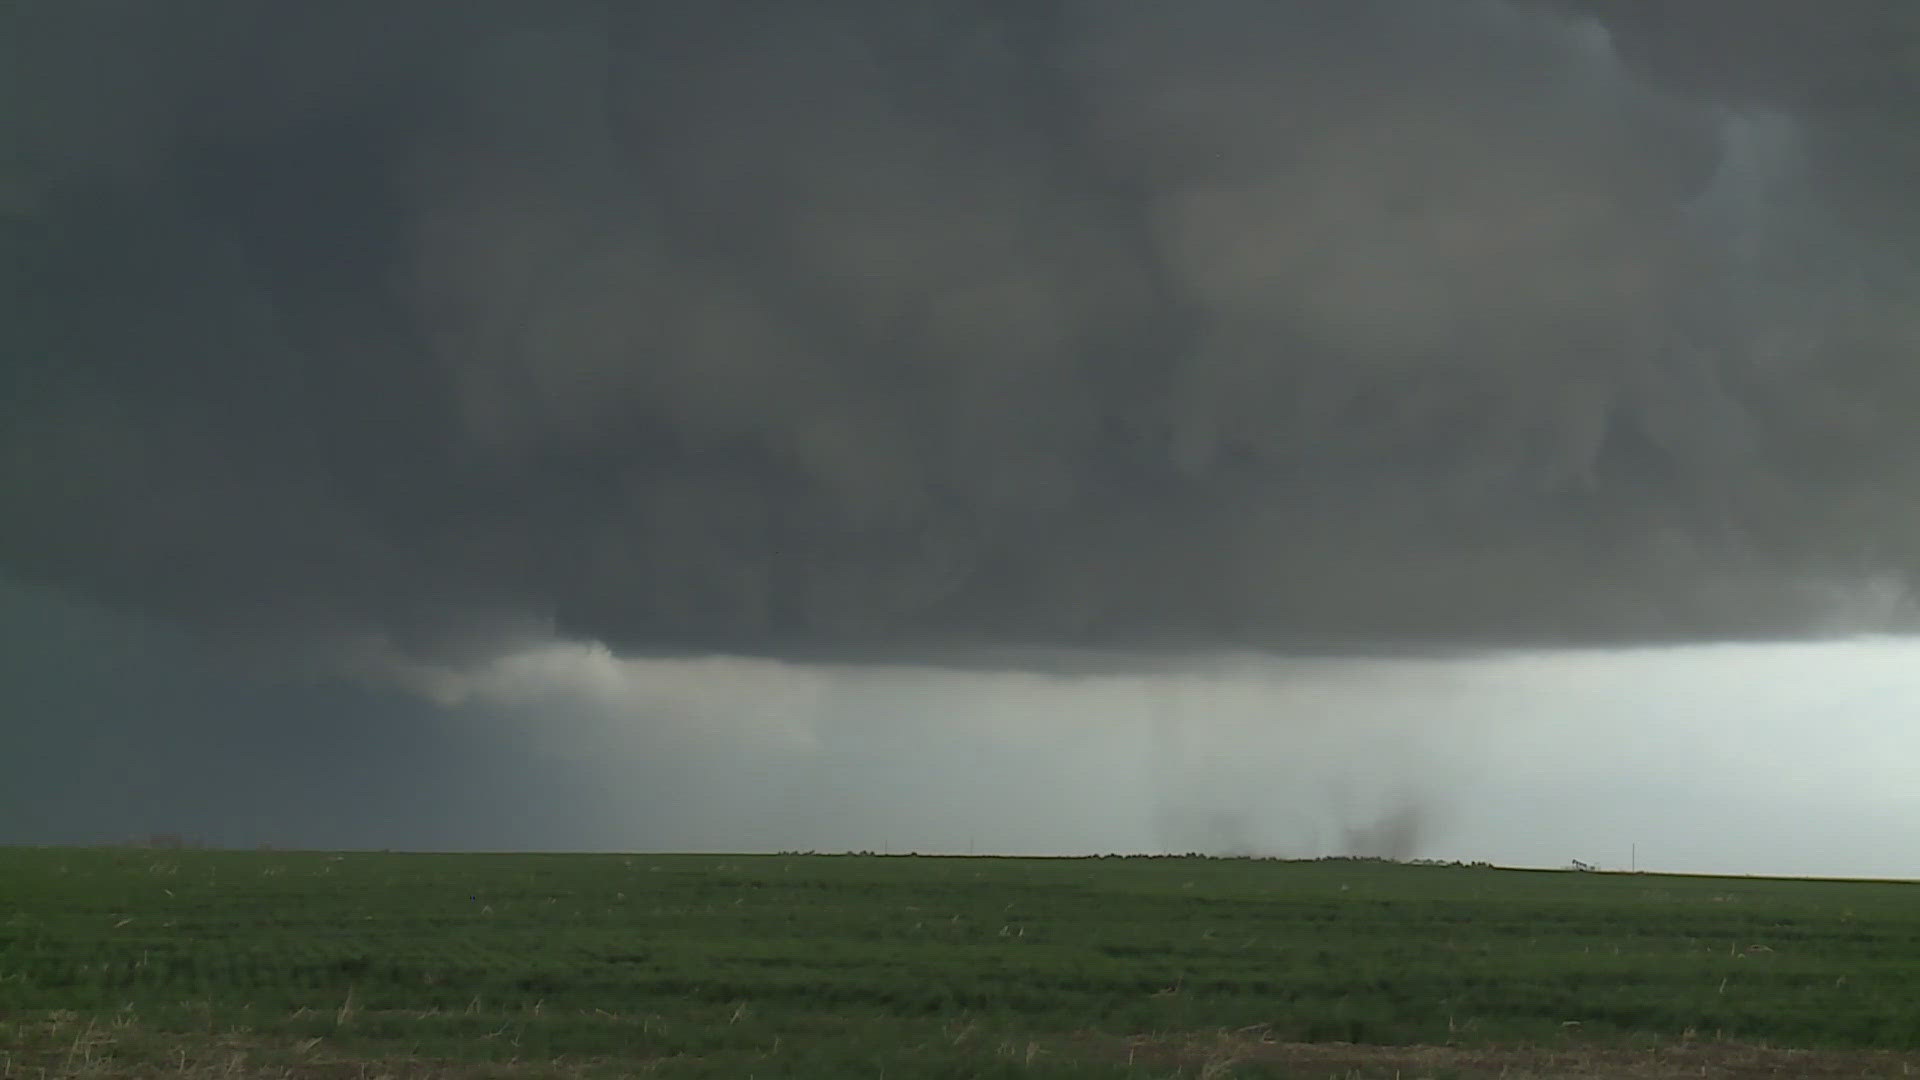 Meteorologist Cory Reppenhagen chased storms in eastern Colorado.